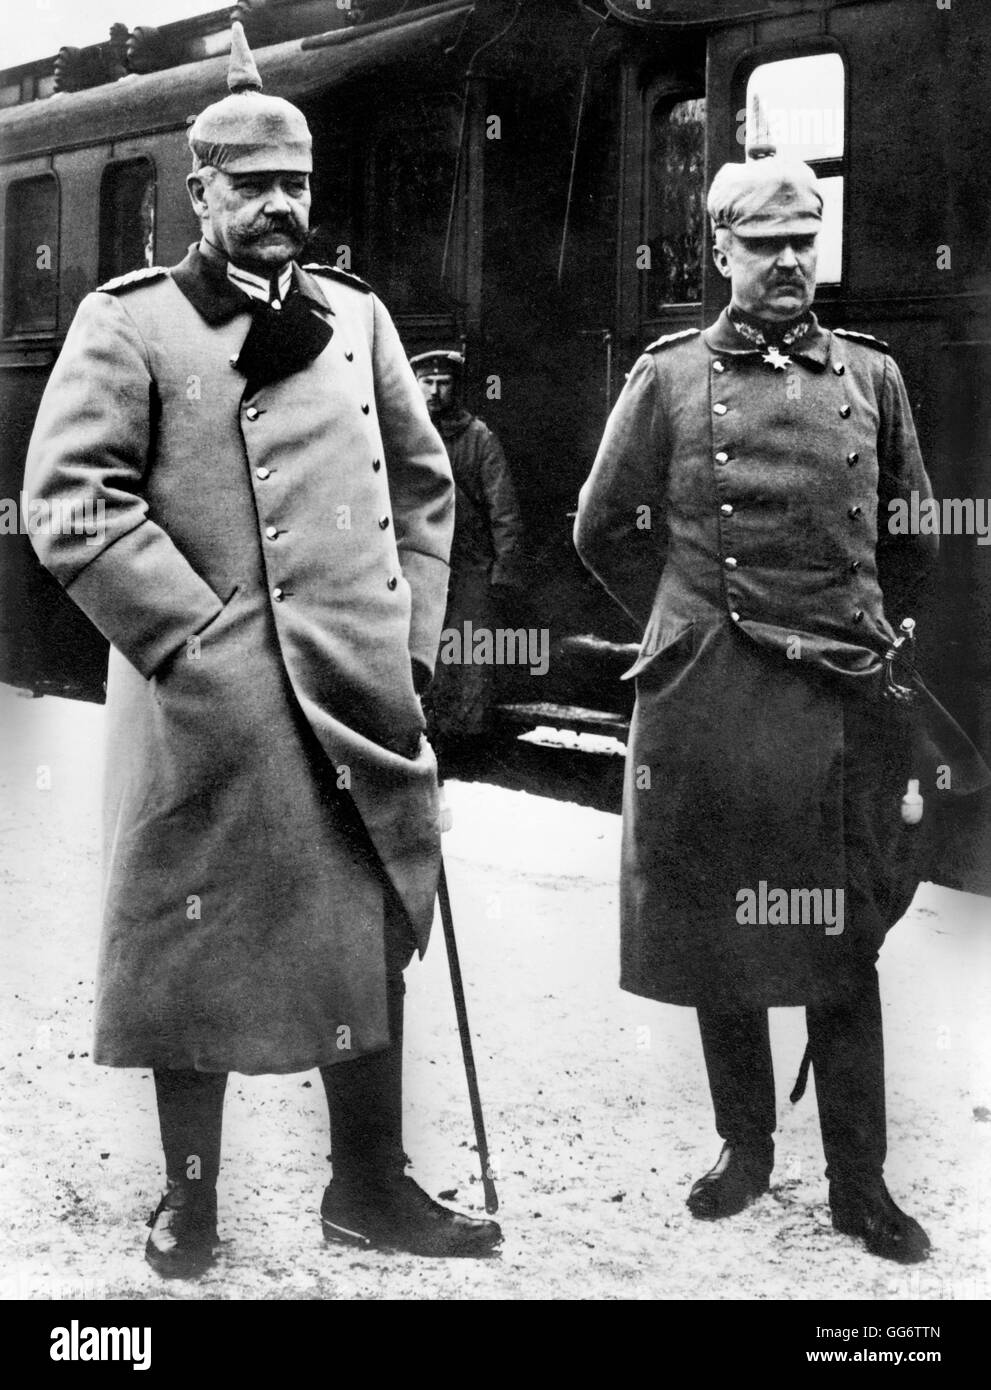 Field Marshal Paul von Hindenburg (1847-1934), Chief of the German General Staff, and his deputy, Erich Ludendorff (1865-1937). They served in those posts from August 1916 onwards. Photo from Bain News Service, c.1915. Stock Photo